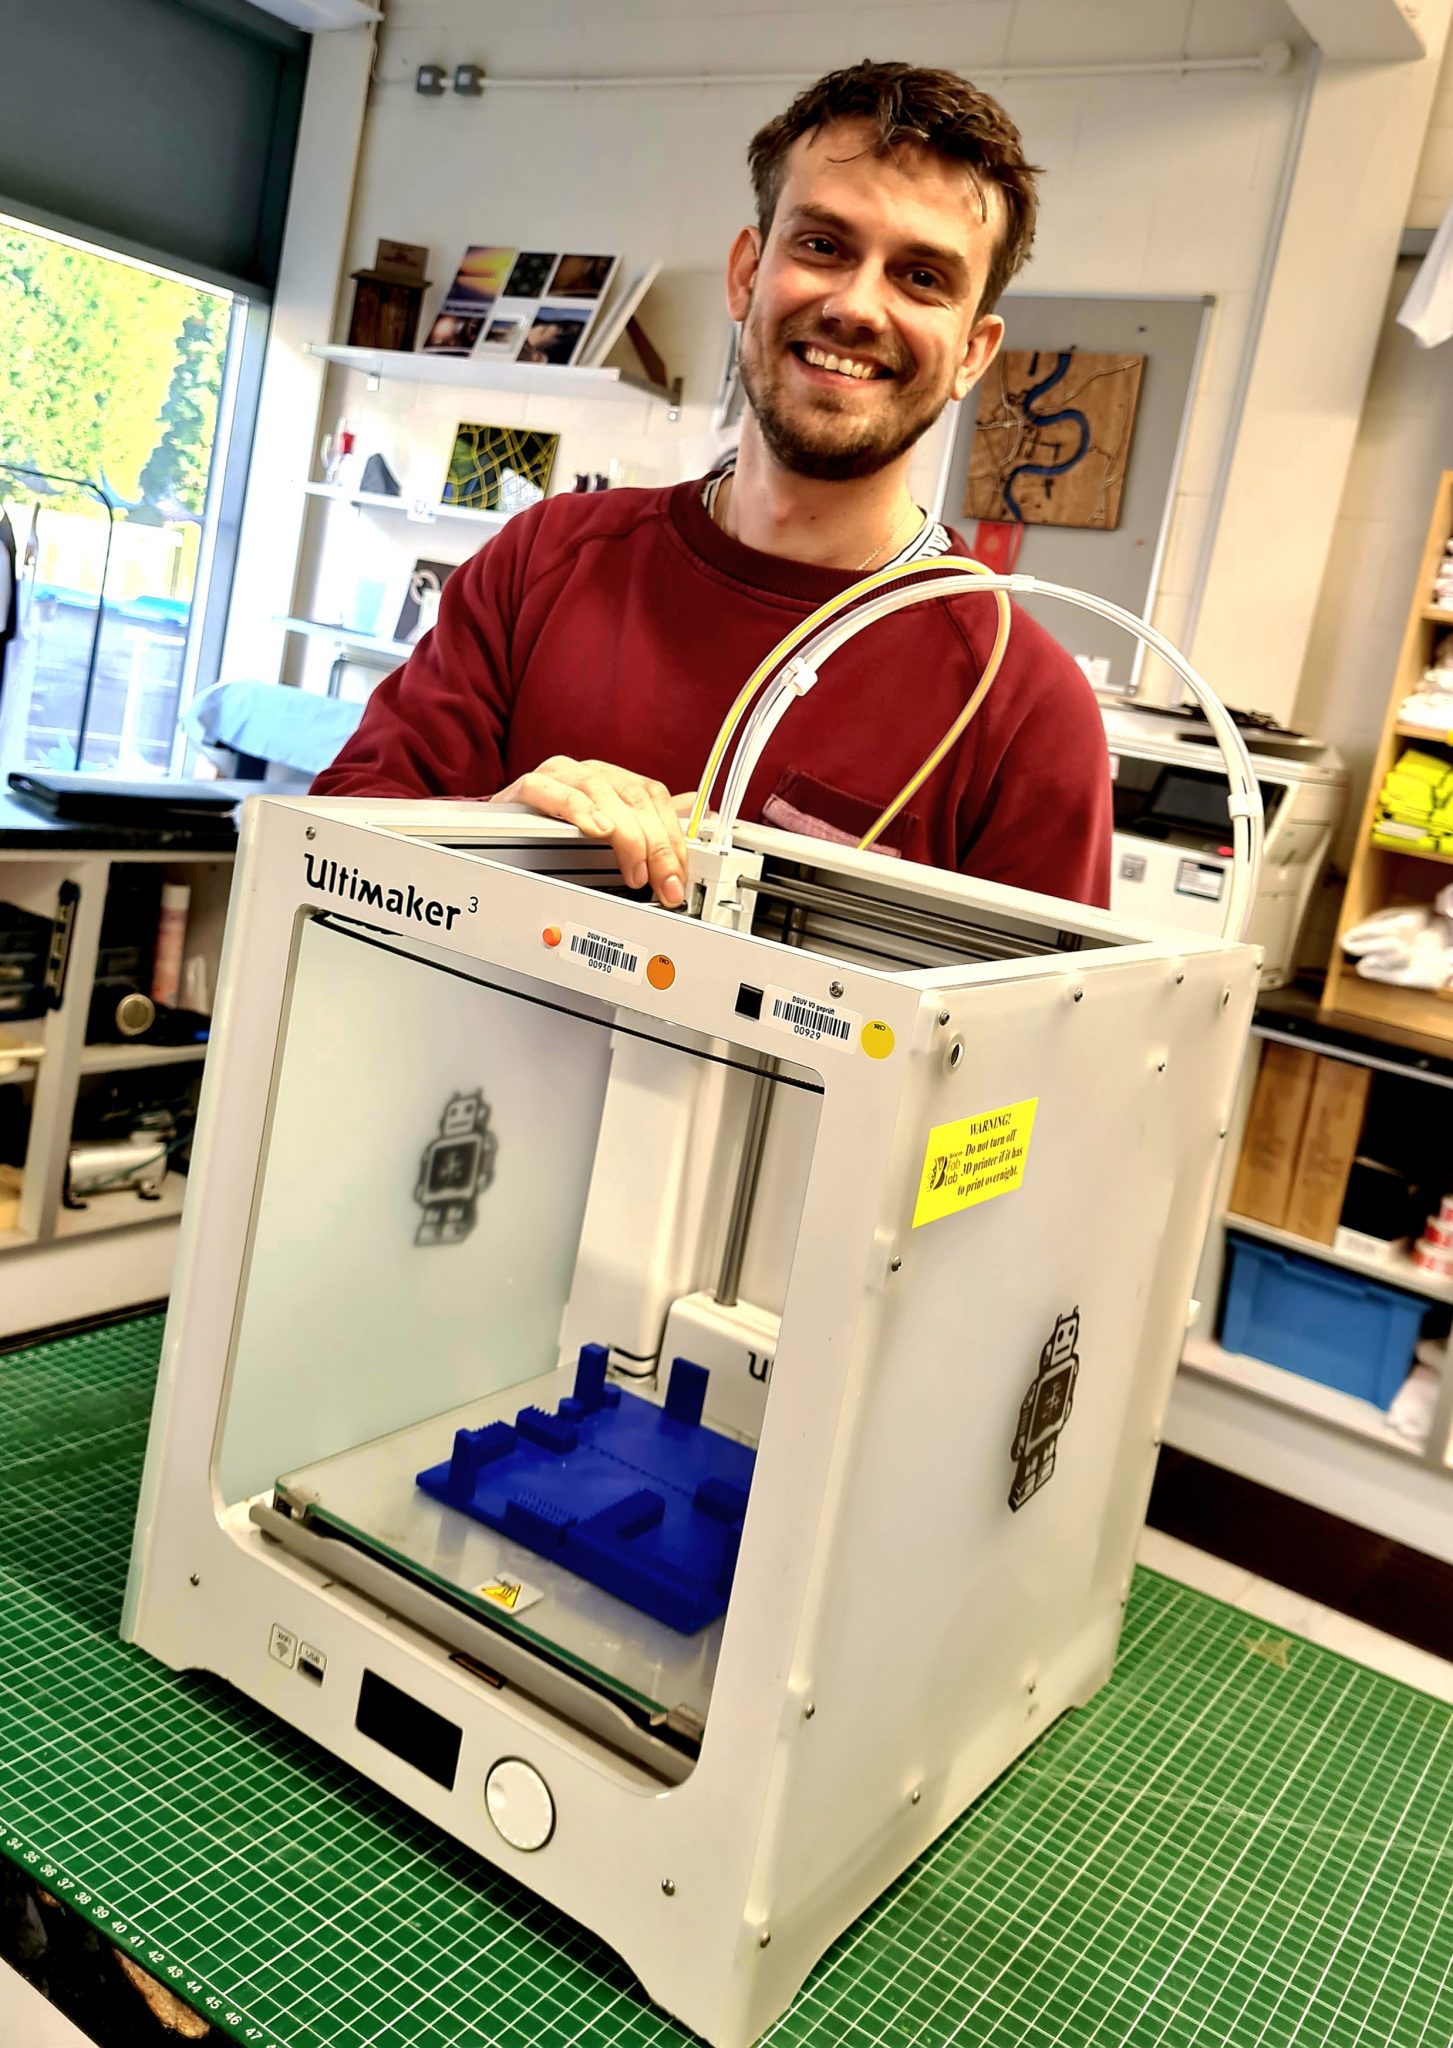 This picture shows a man in our Fab Lab, stood behind a 3D printer and is smiling towards the camera.